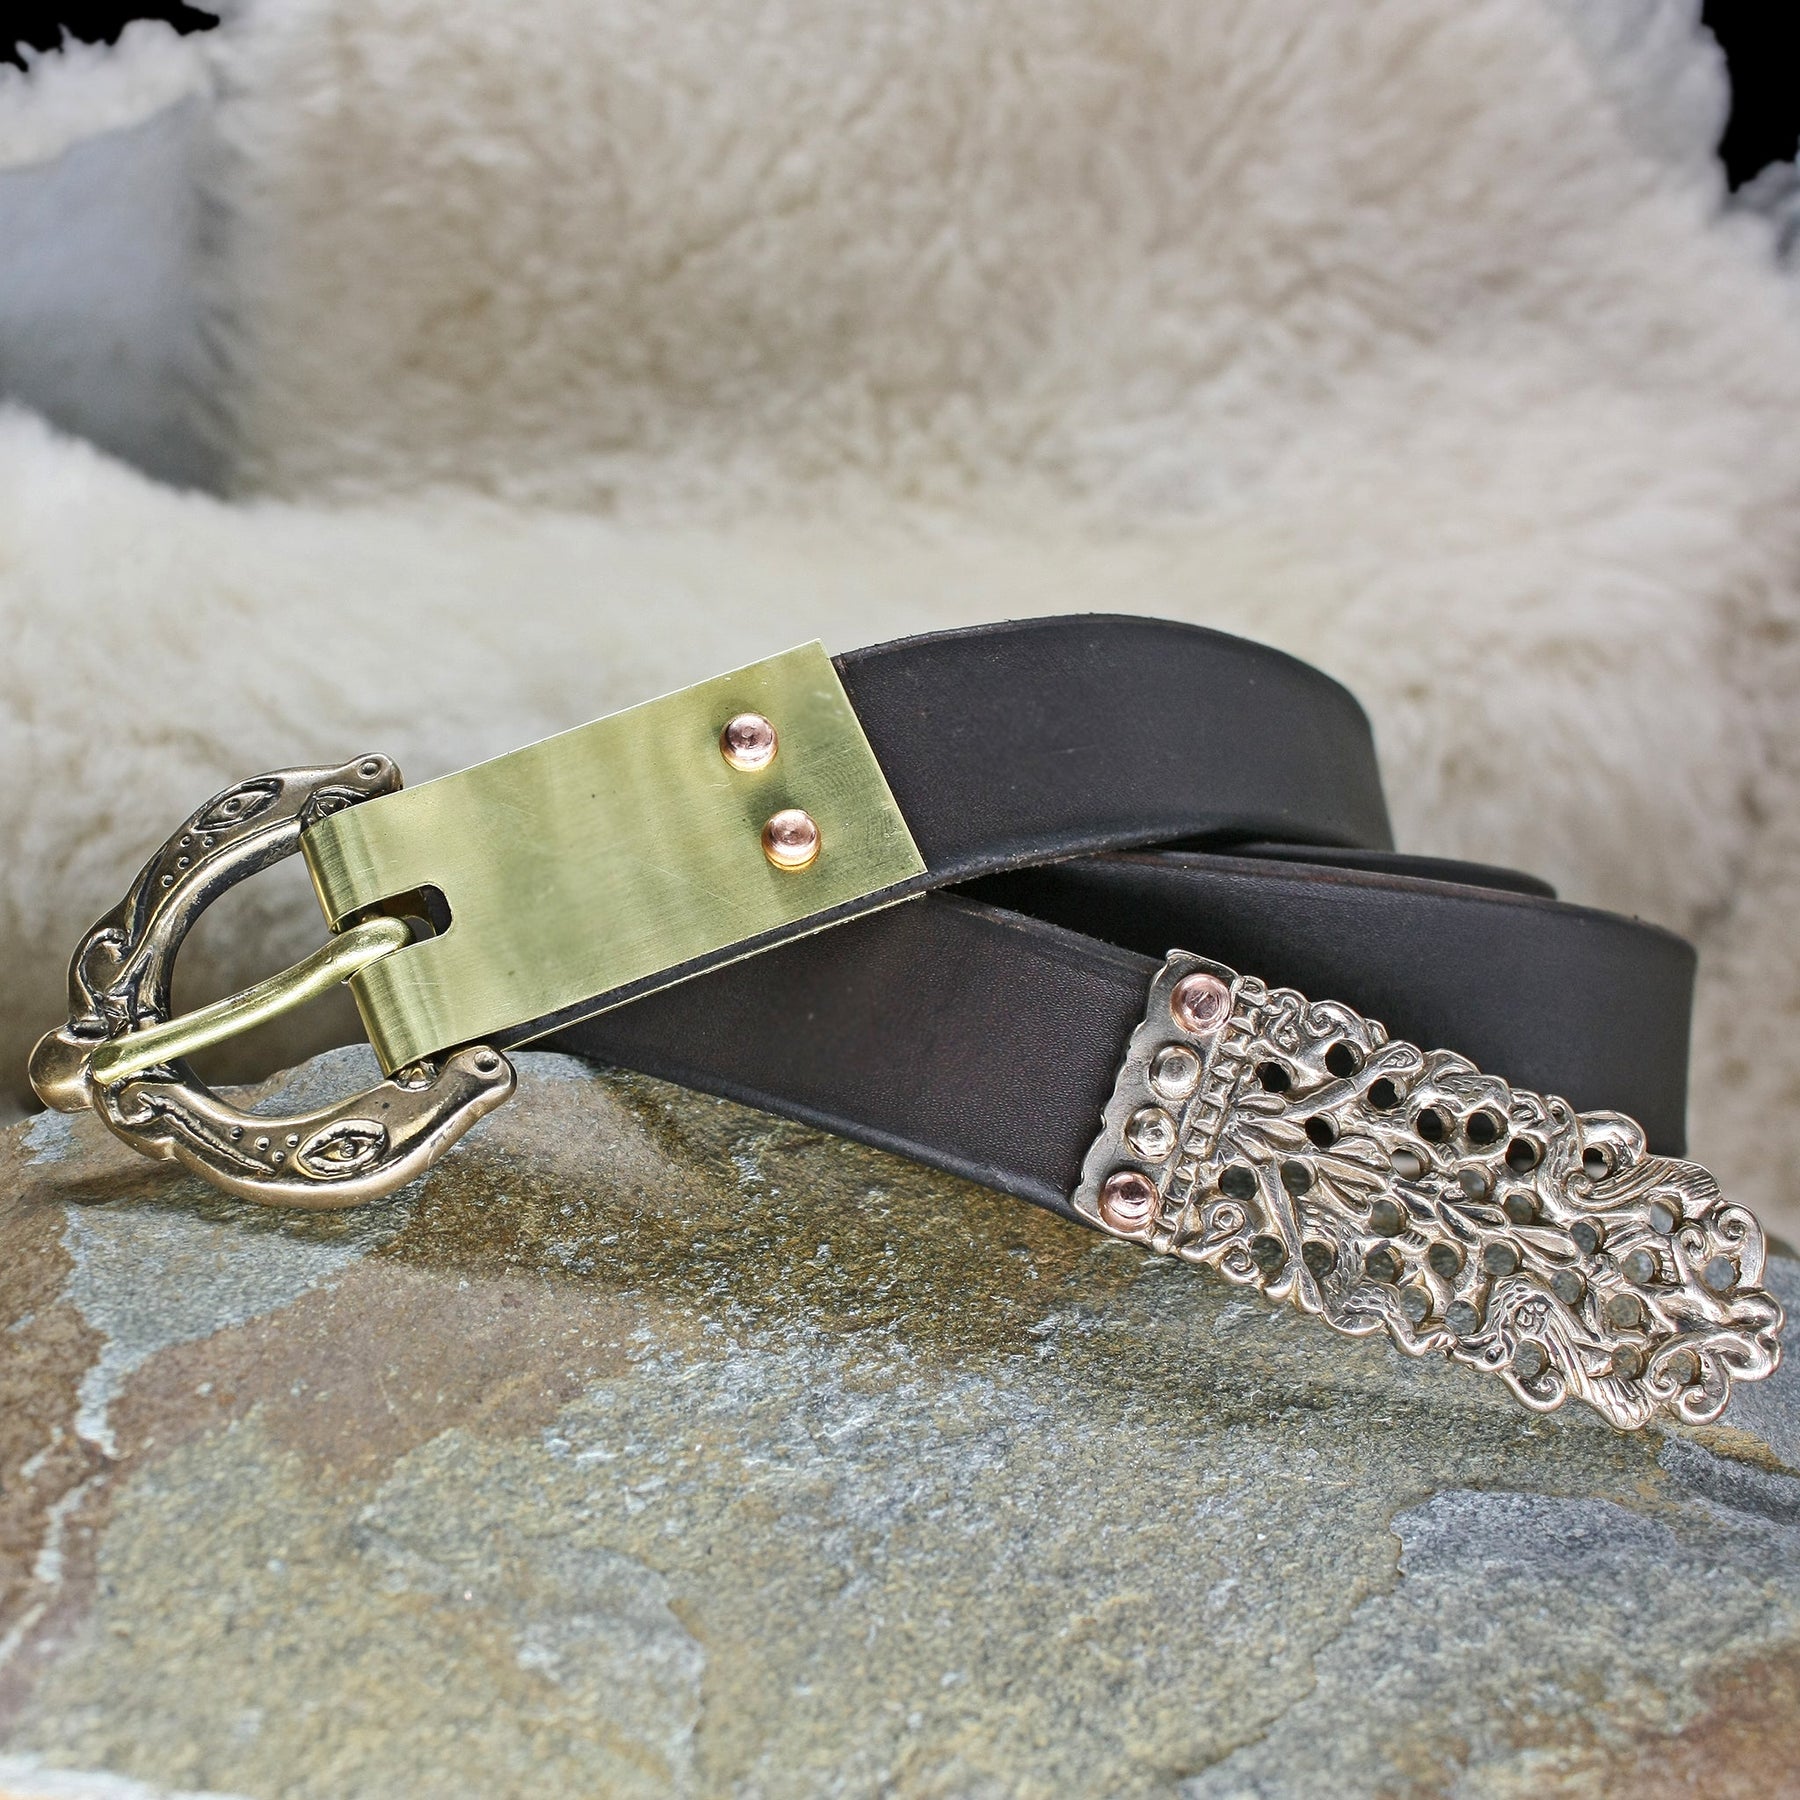 Customisable Handmade Leather Viking Belt with Bronze Replica Fittings